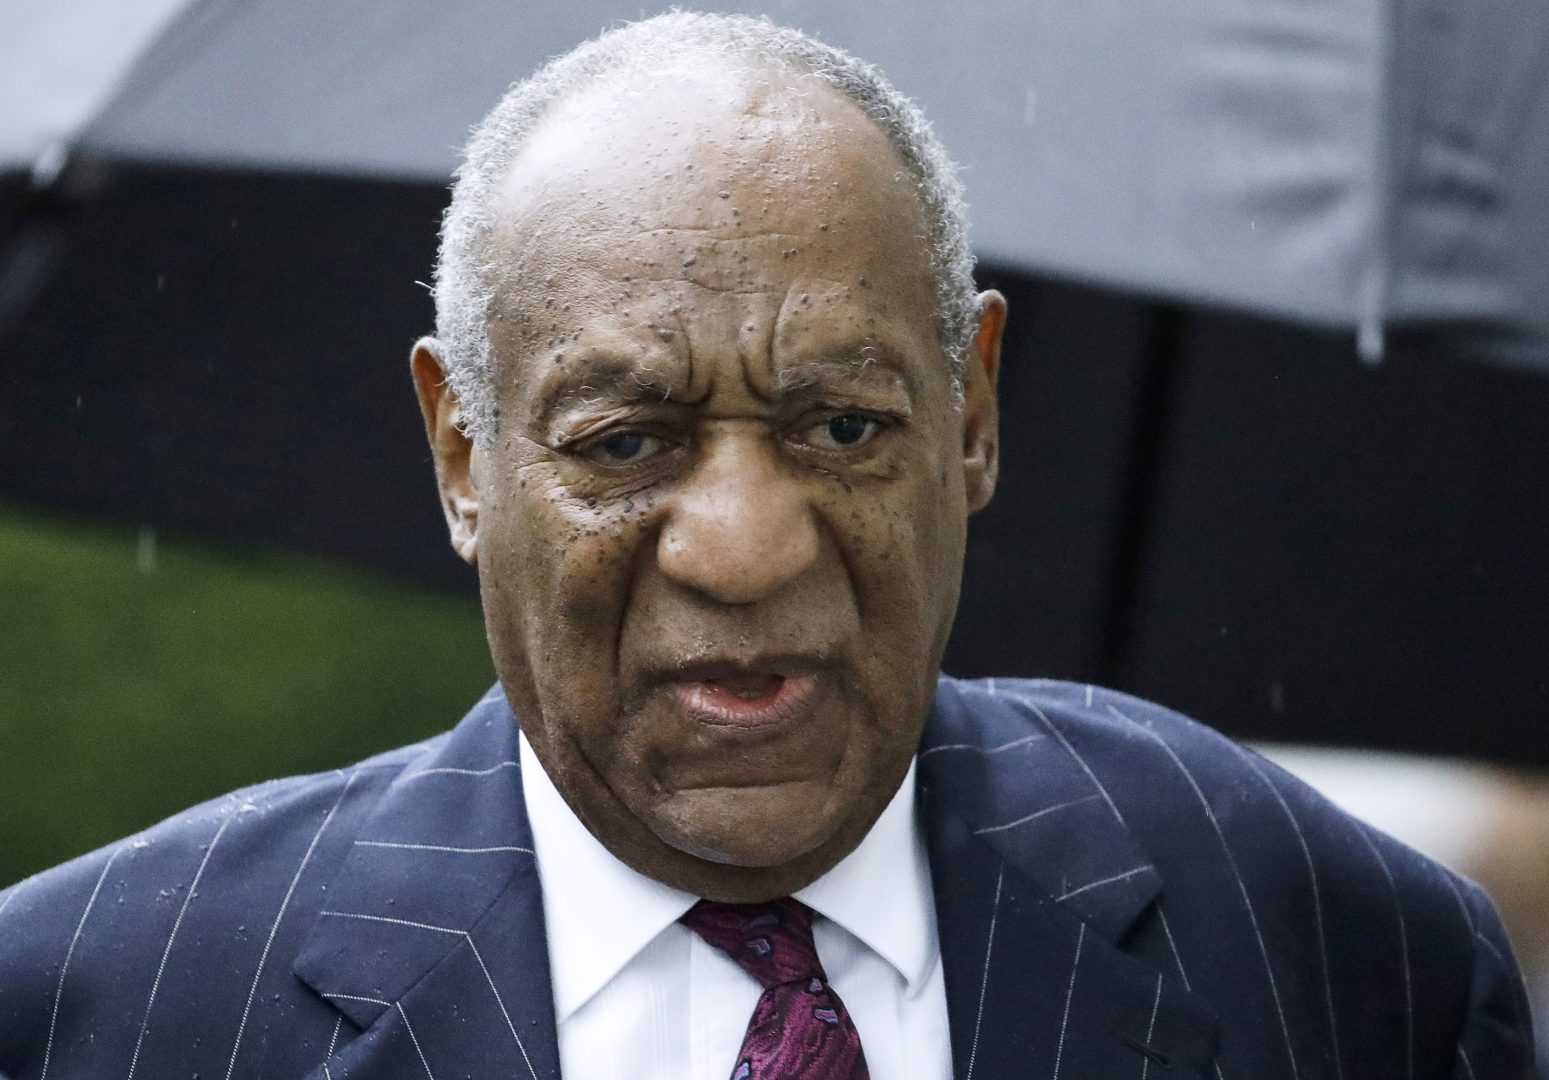 FILE - Bill Cosby arrives for a sentencing hearing following his sexual assault conviction at the Montgomery County Courthouse in Norristown Pa., on Sept. 25, 2018. A lawyer for Cosby asked the U.S. Supreme Court on Monday, Jan. 31, 2022, to reject a bid by prosecutors to revive his criminal sex assault case.  The 84-year-old actor and comedian has been free since June 2021, when a Pennsylvania appeals court overturned his conviction and released him from prison after nearly three years.  (AP Photo/Matt Rourke, File)